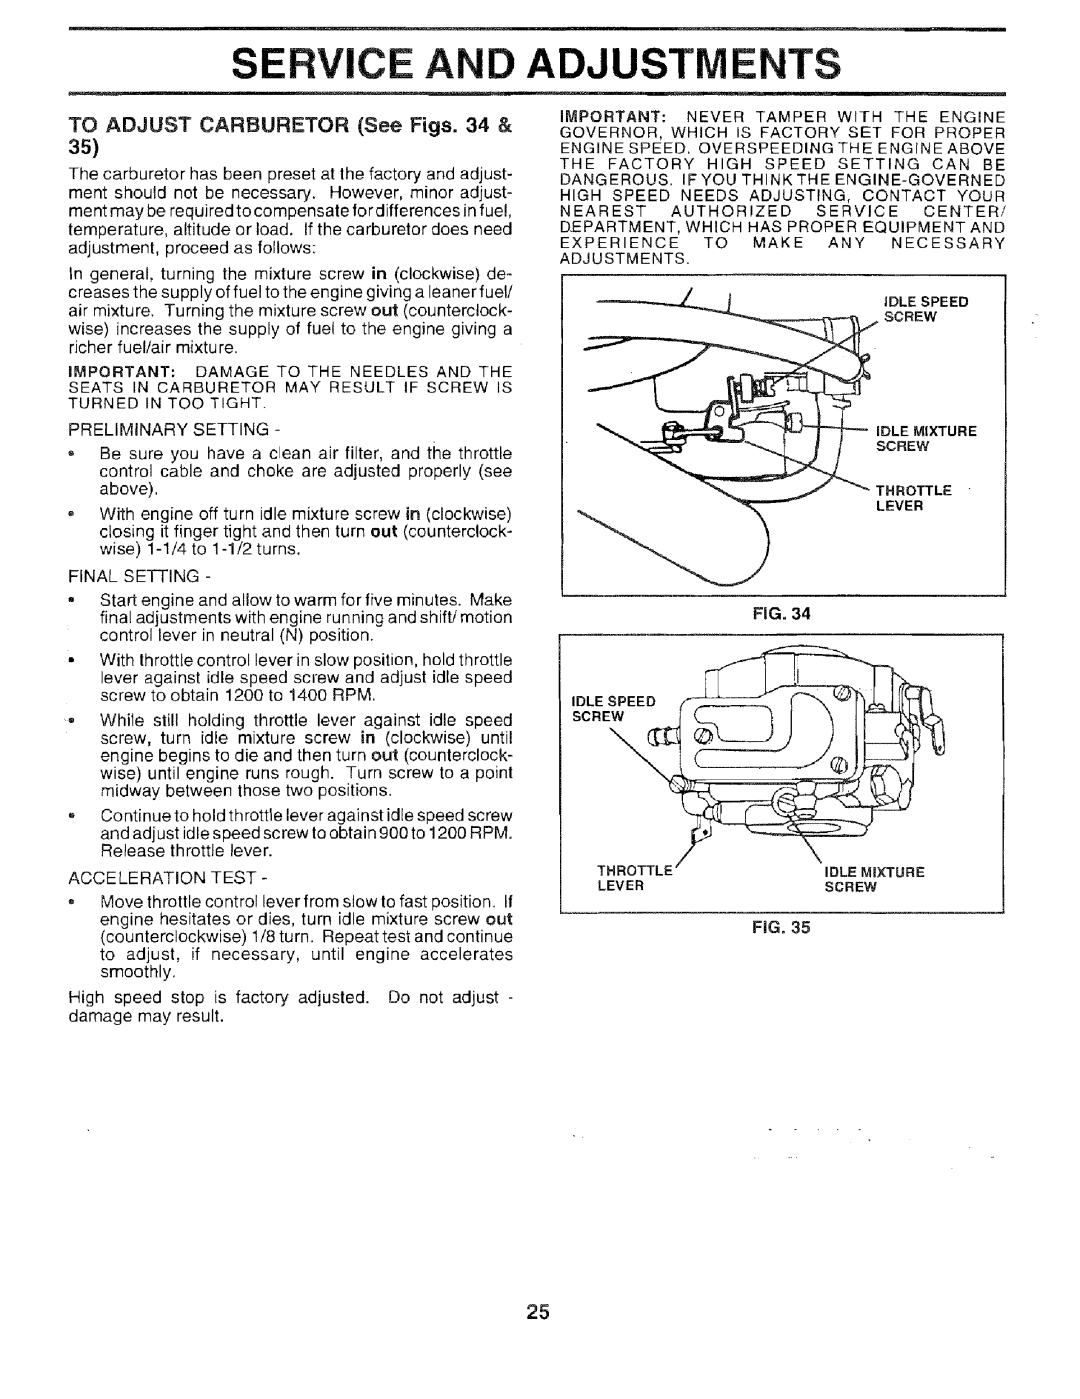 Sears 917.259567 owner manual Ervice And, Screw, t I, TO ADJUST CARBURETOR See Figs. 34, Adjustments 